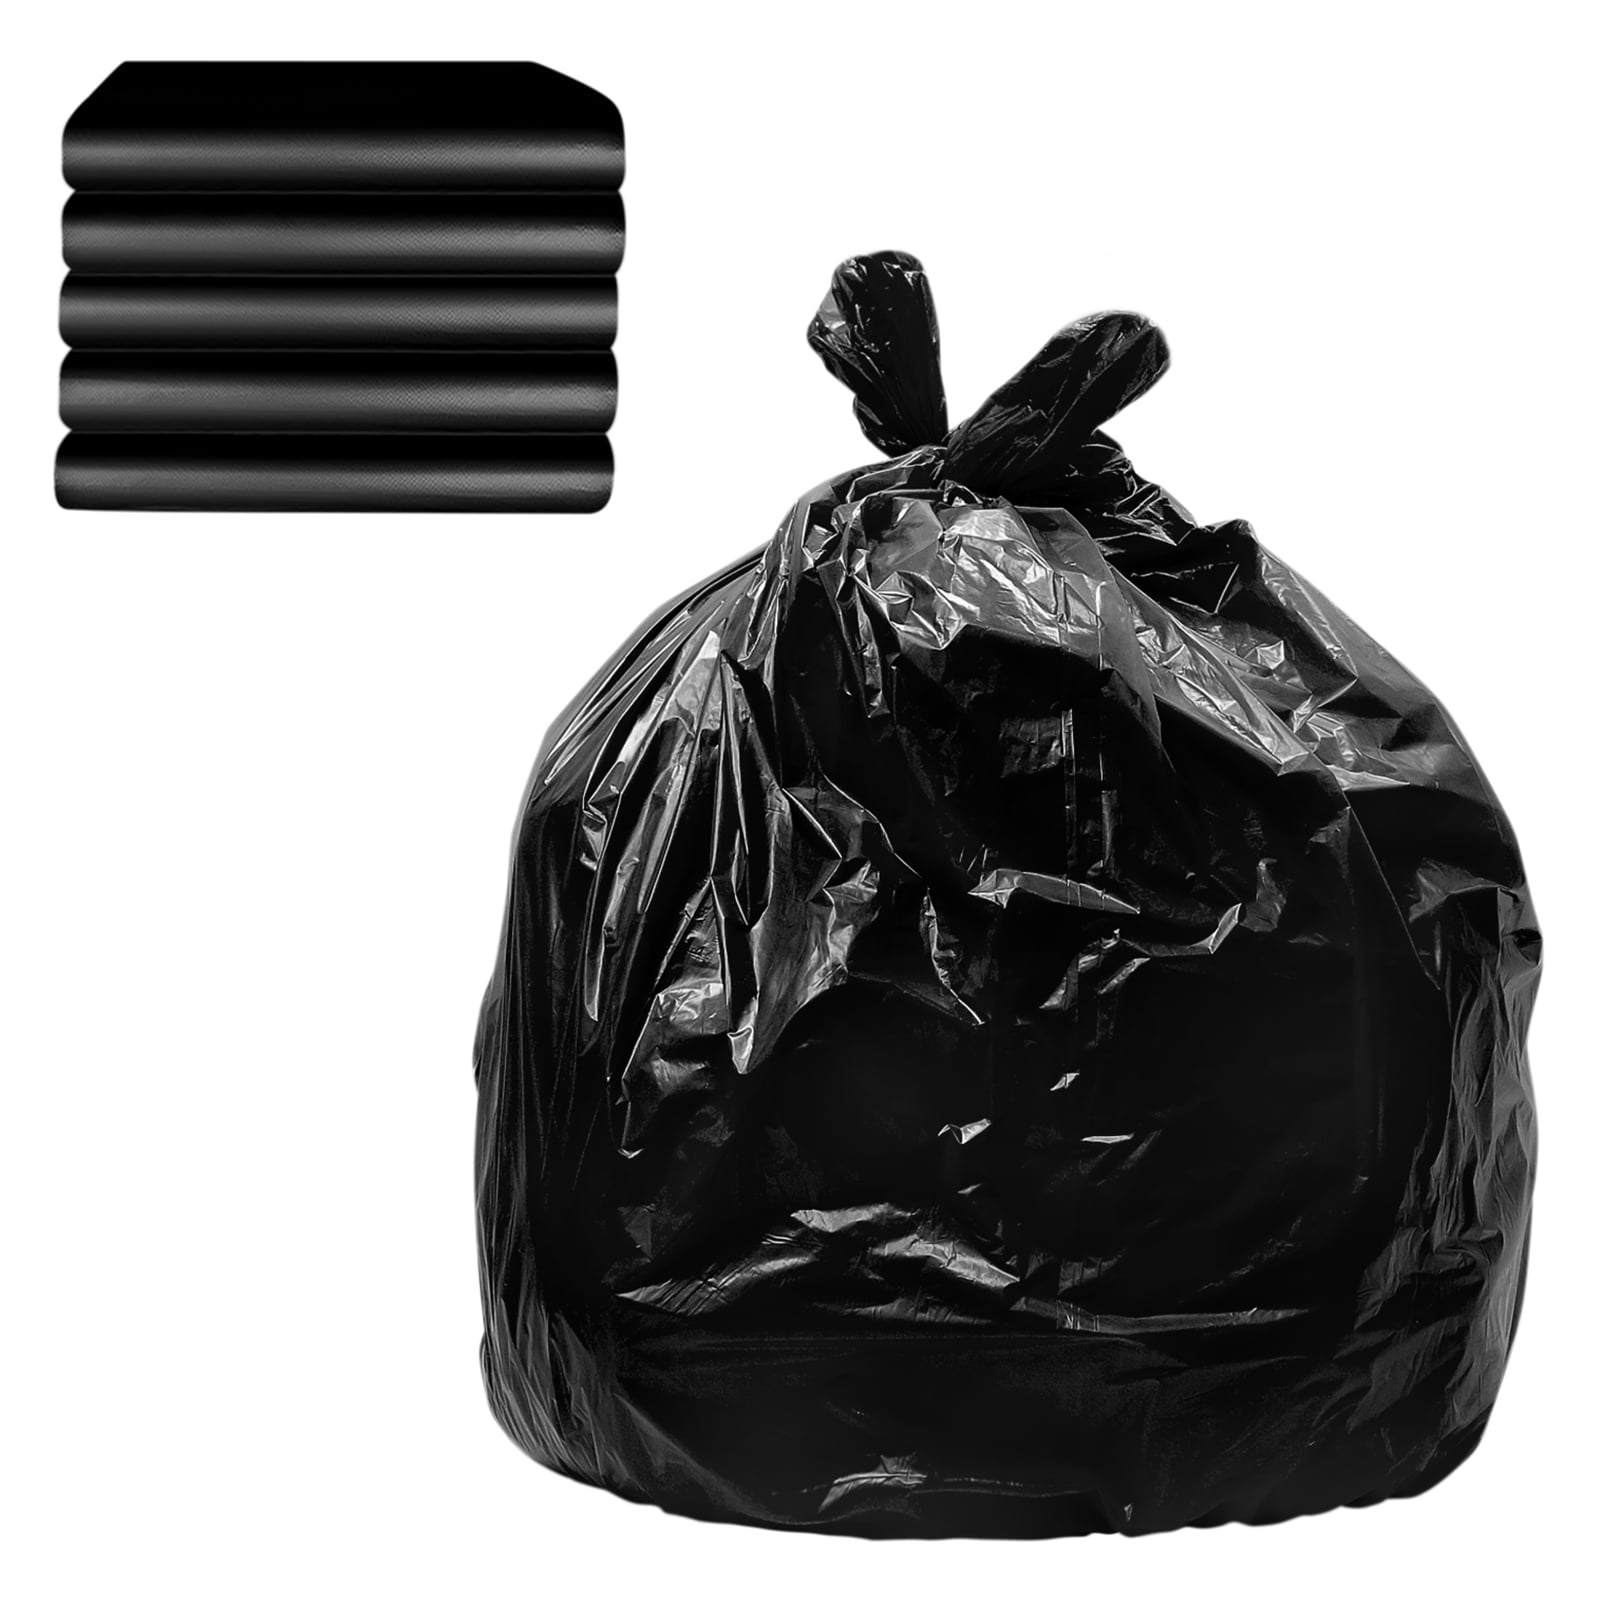 8 Gallon 40 Counts Strong Trash Bags Garbage Bags by Teivio, Bathroom Trash  Can Bin Liners, Medium Plastic Bags for home office kitchen, Black